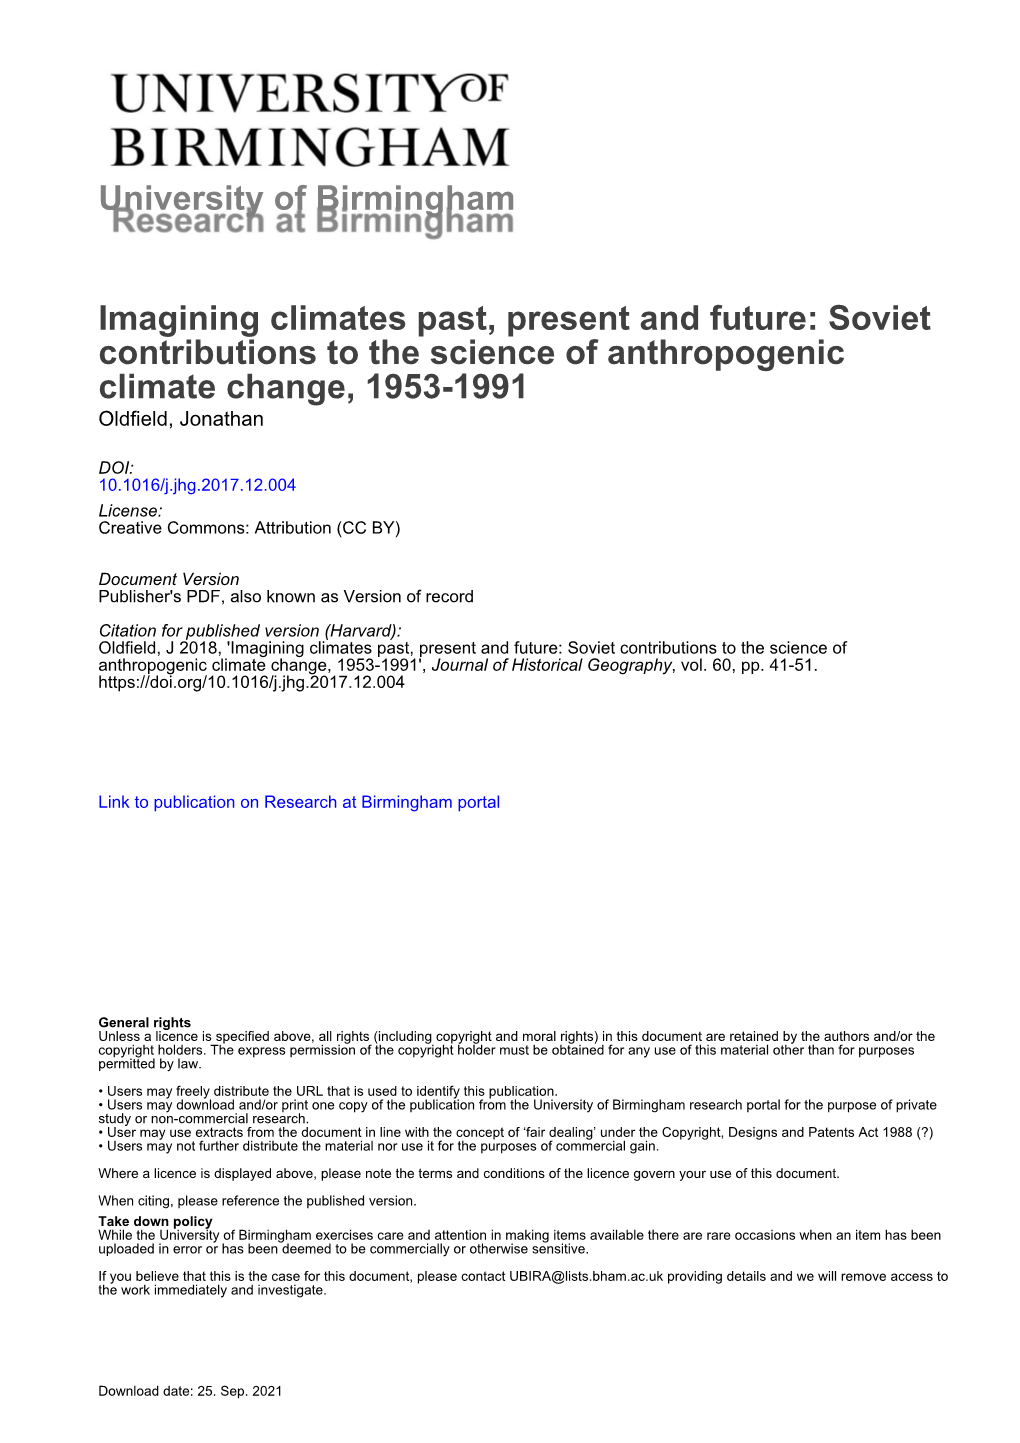 Soviet Contributions to the Science of Anthropogenic Climate Change, 1953-1991 Oldfield, Jonathan